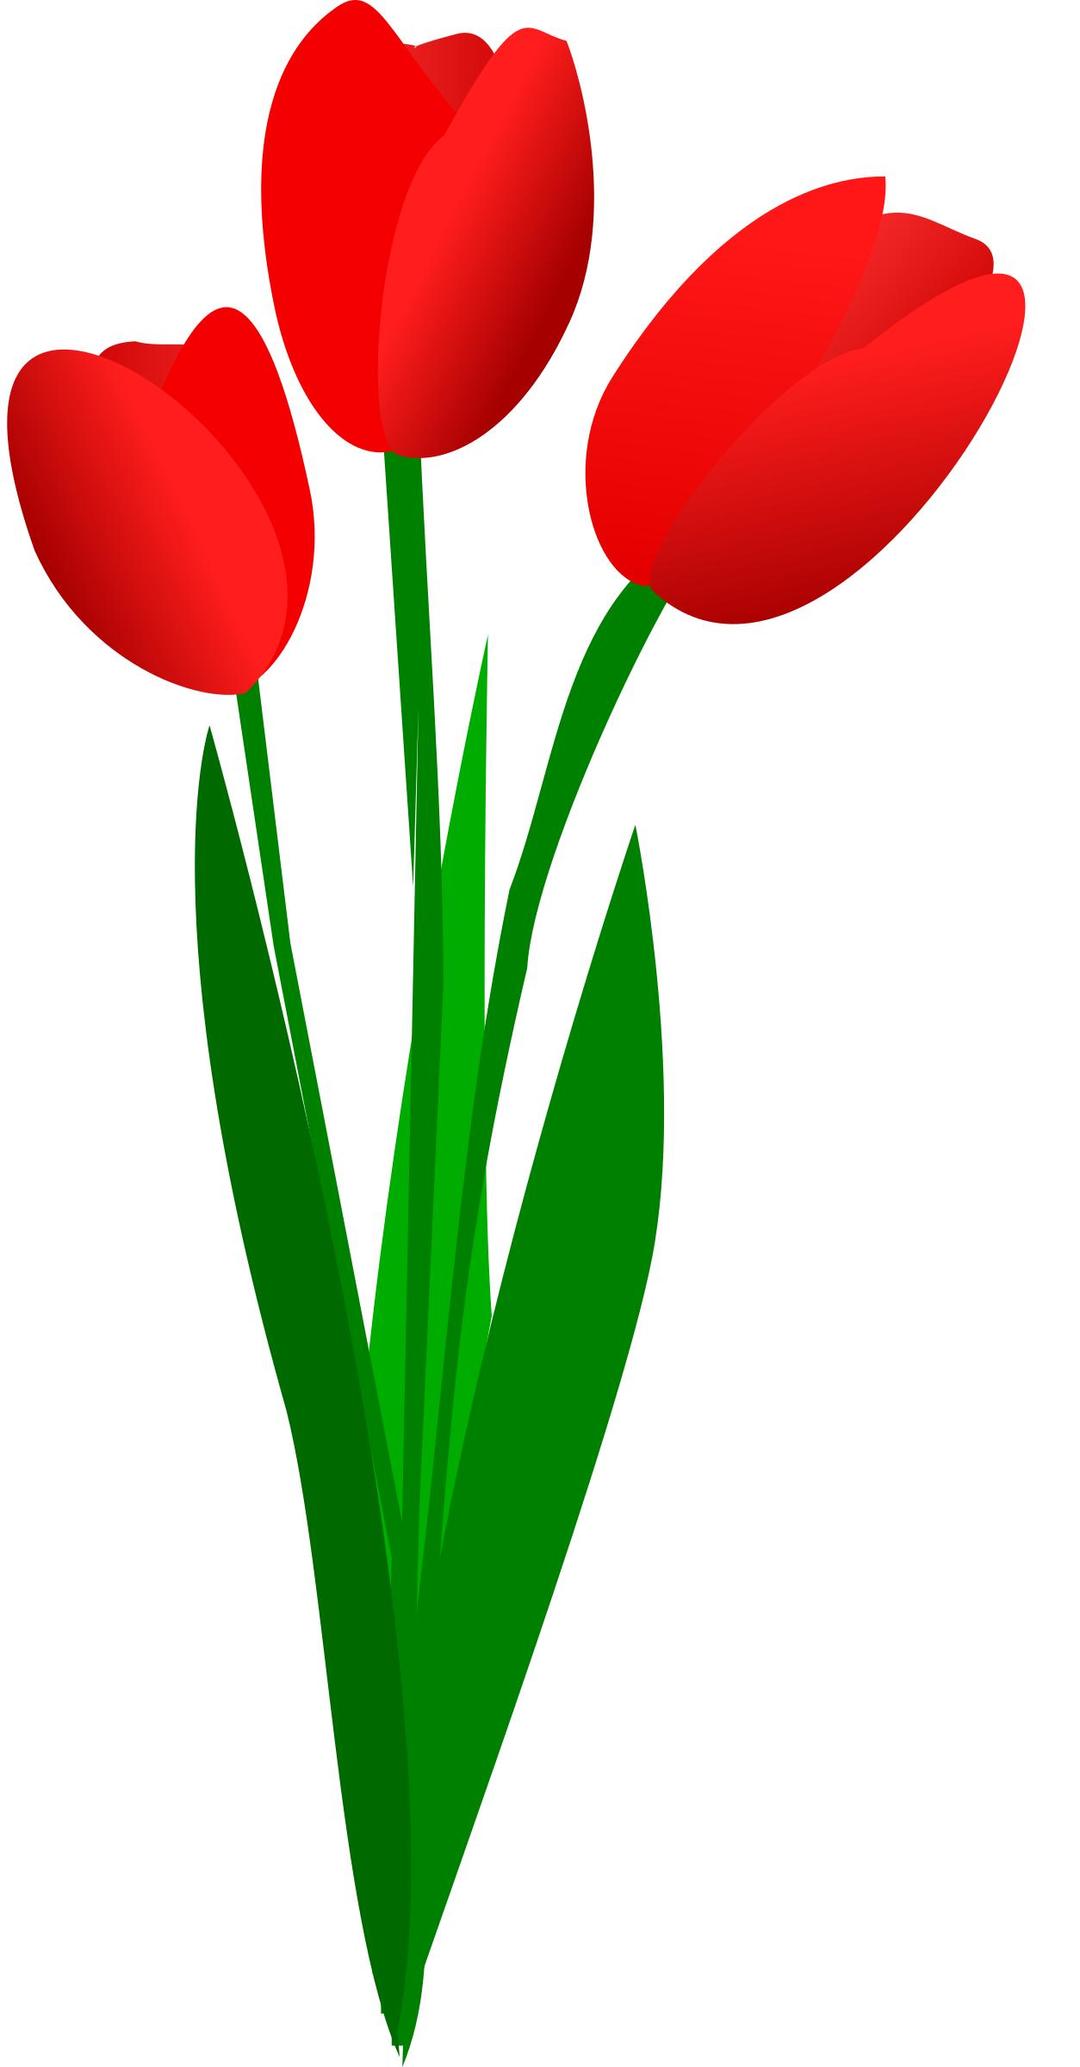 three red tulips png transparent